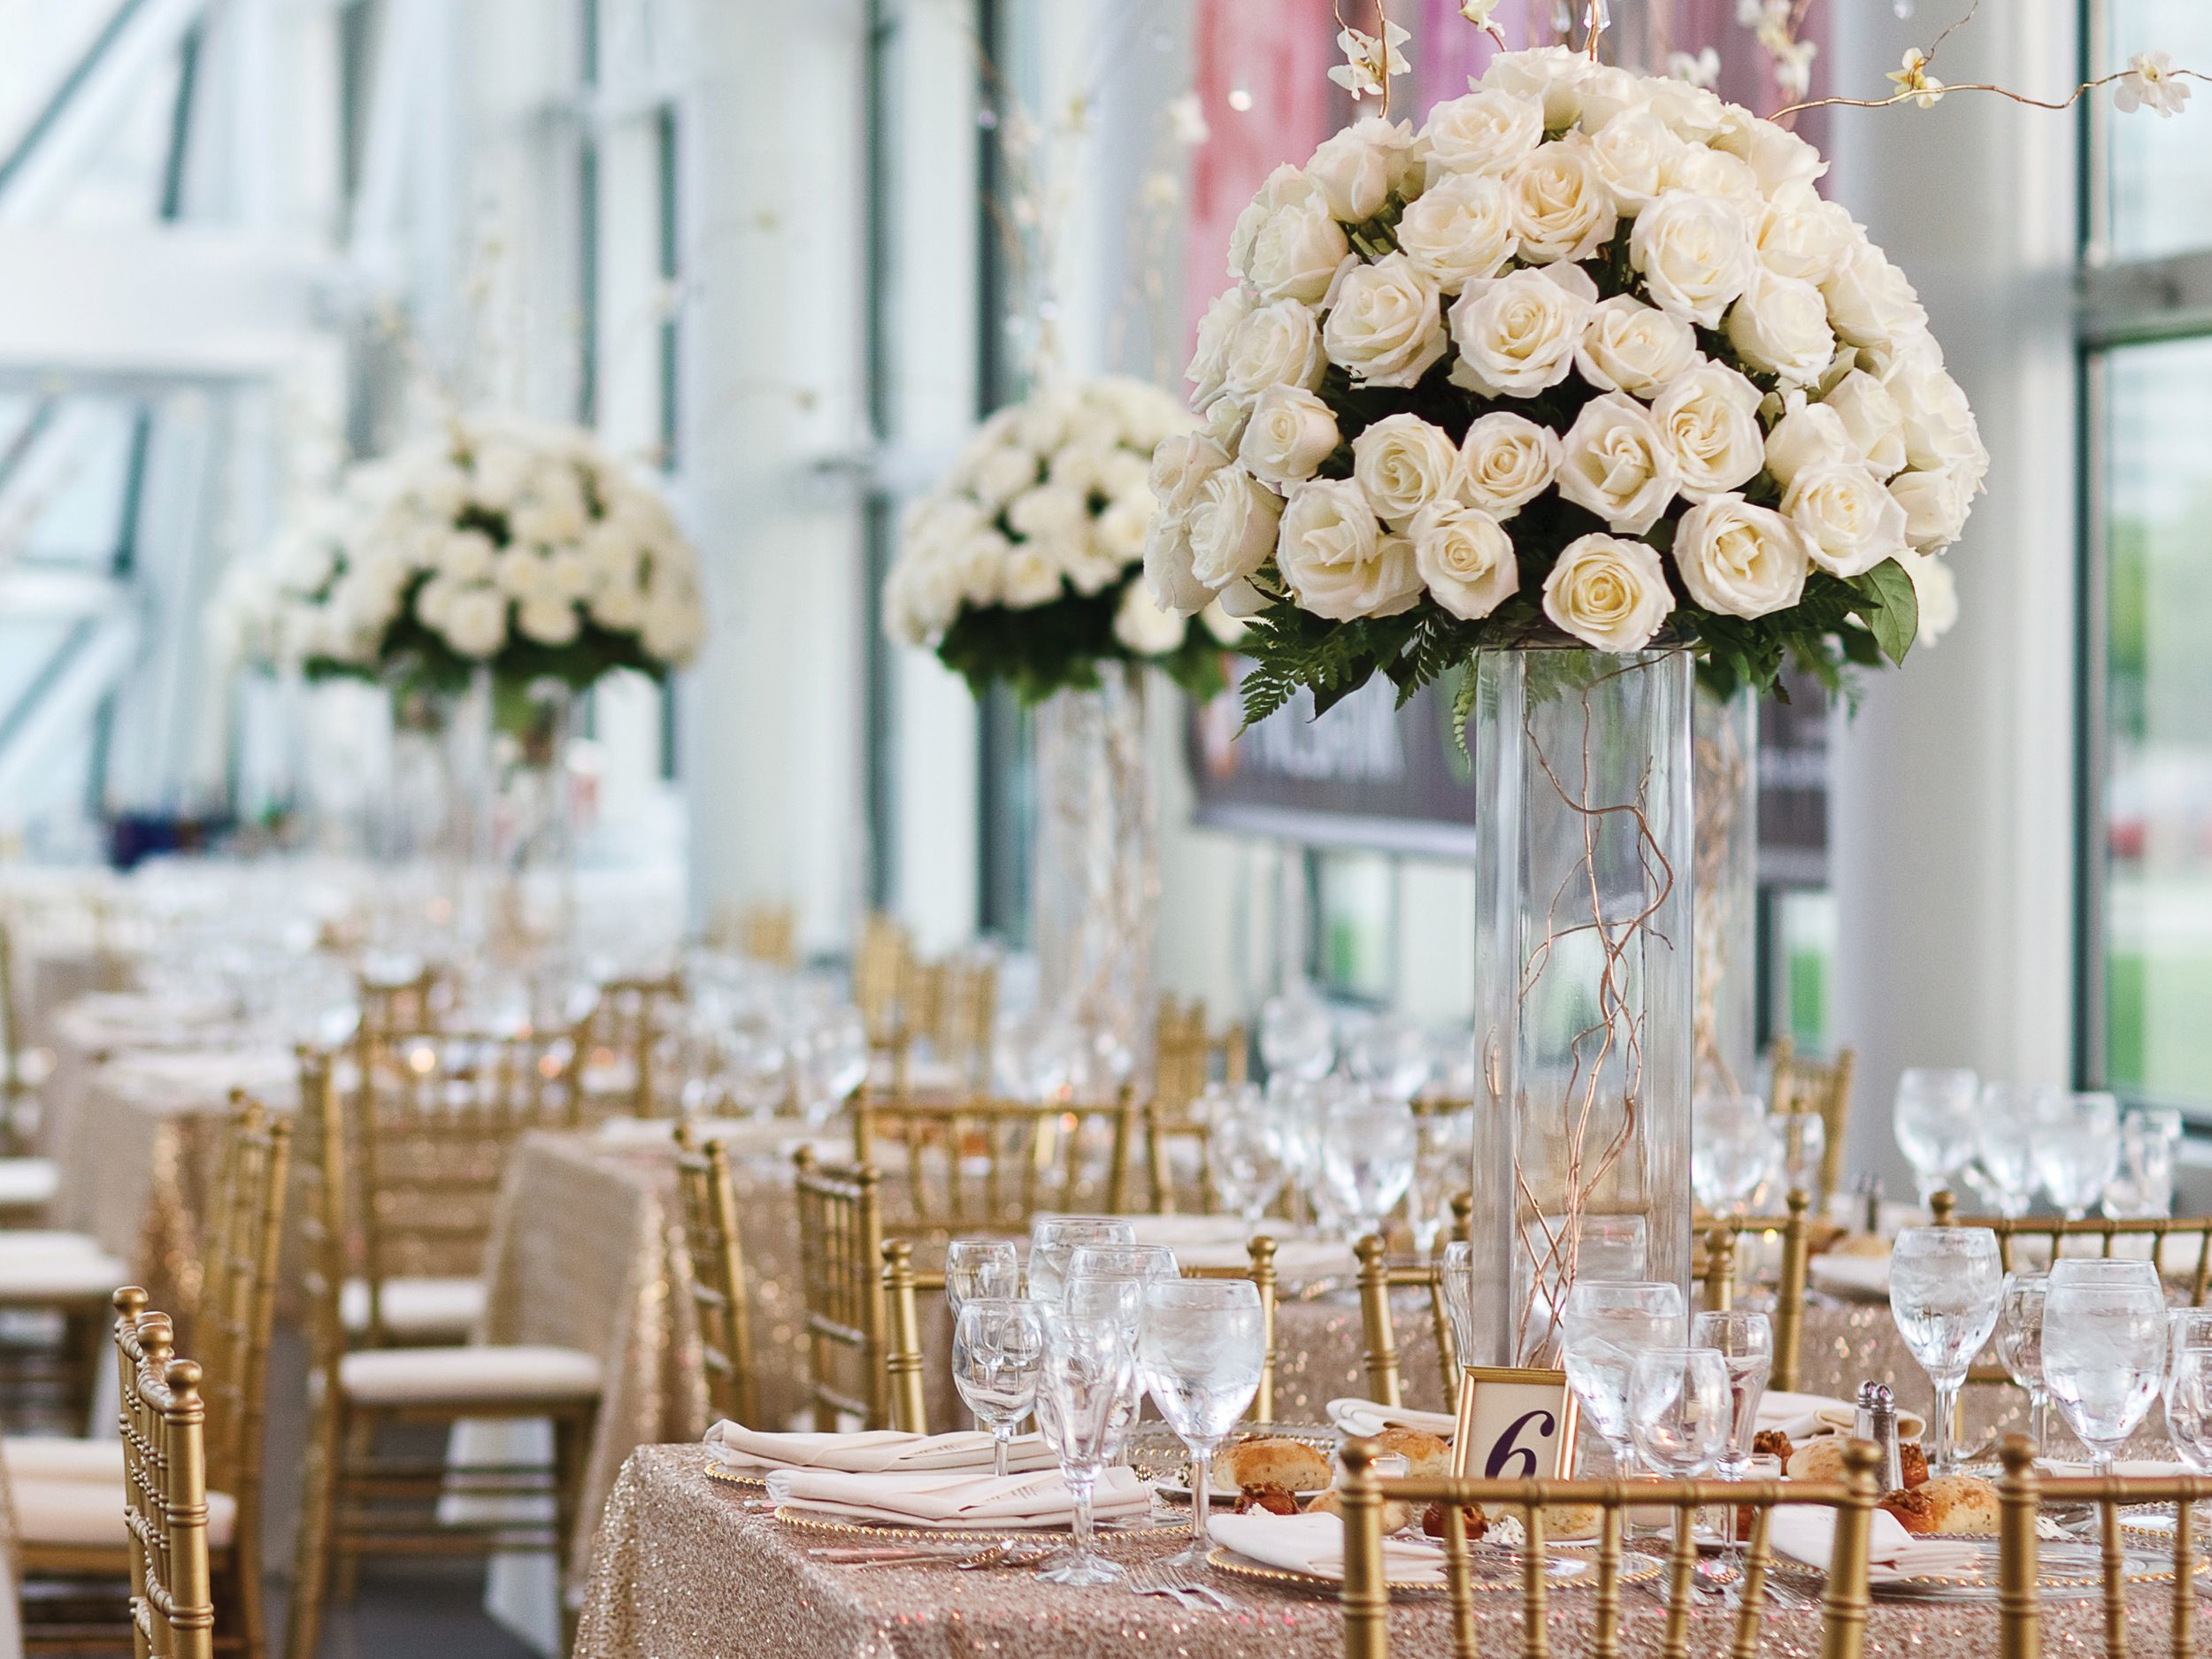 You Need These Points on Your Reception Venue Contract